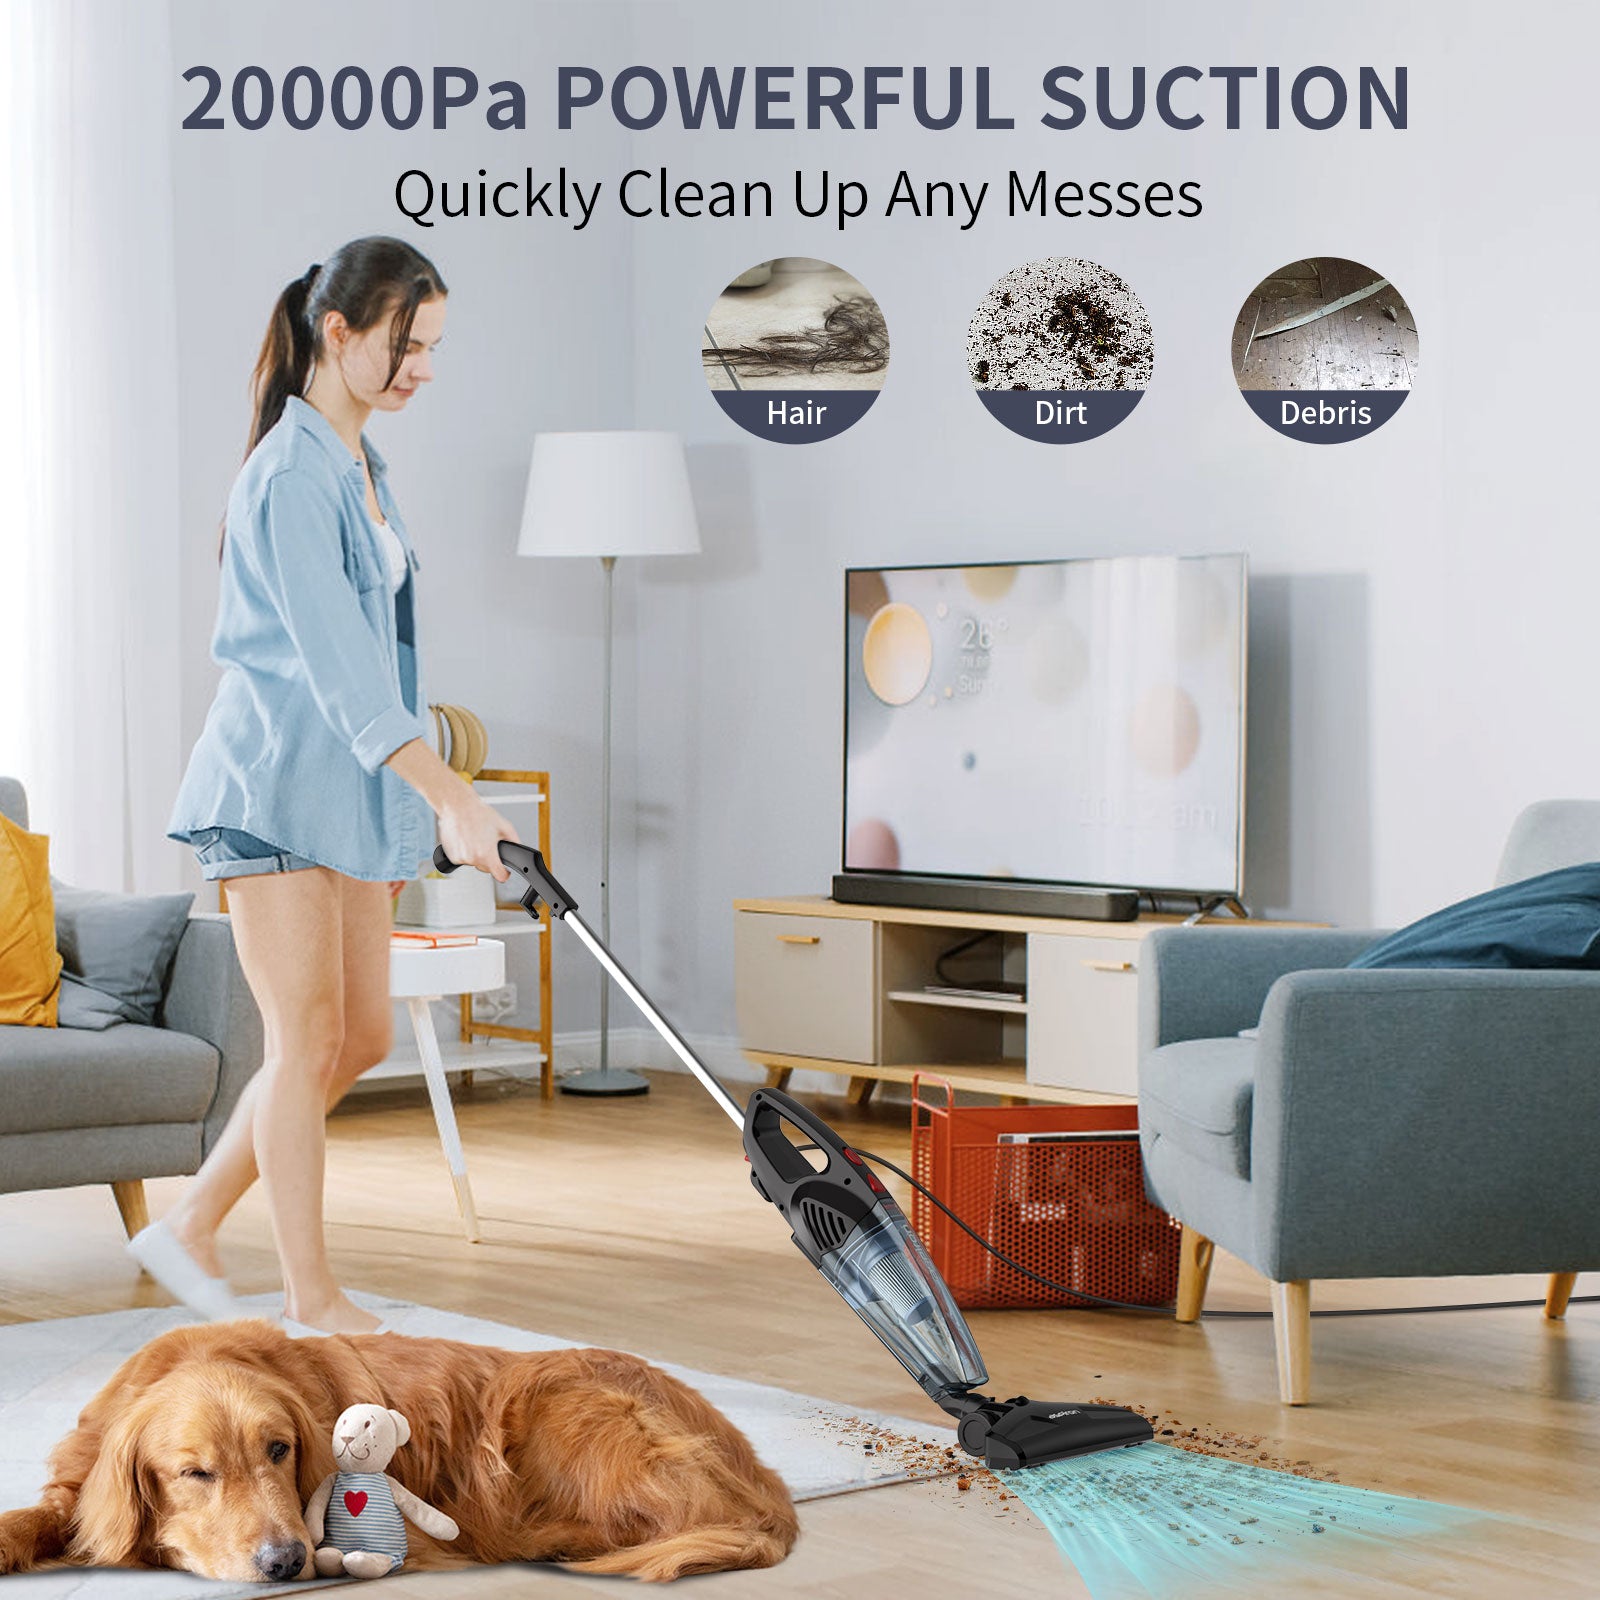 Cleaning Made Easy Let's Clean With My BLACK+DECKER 1300W 5-in-1